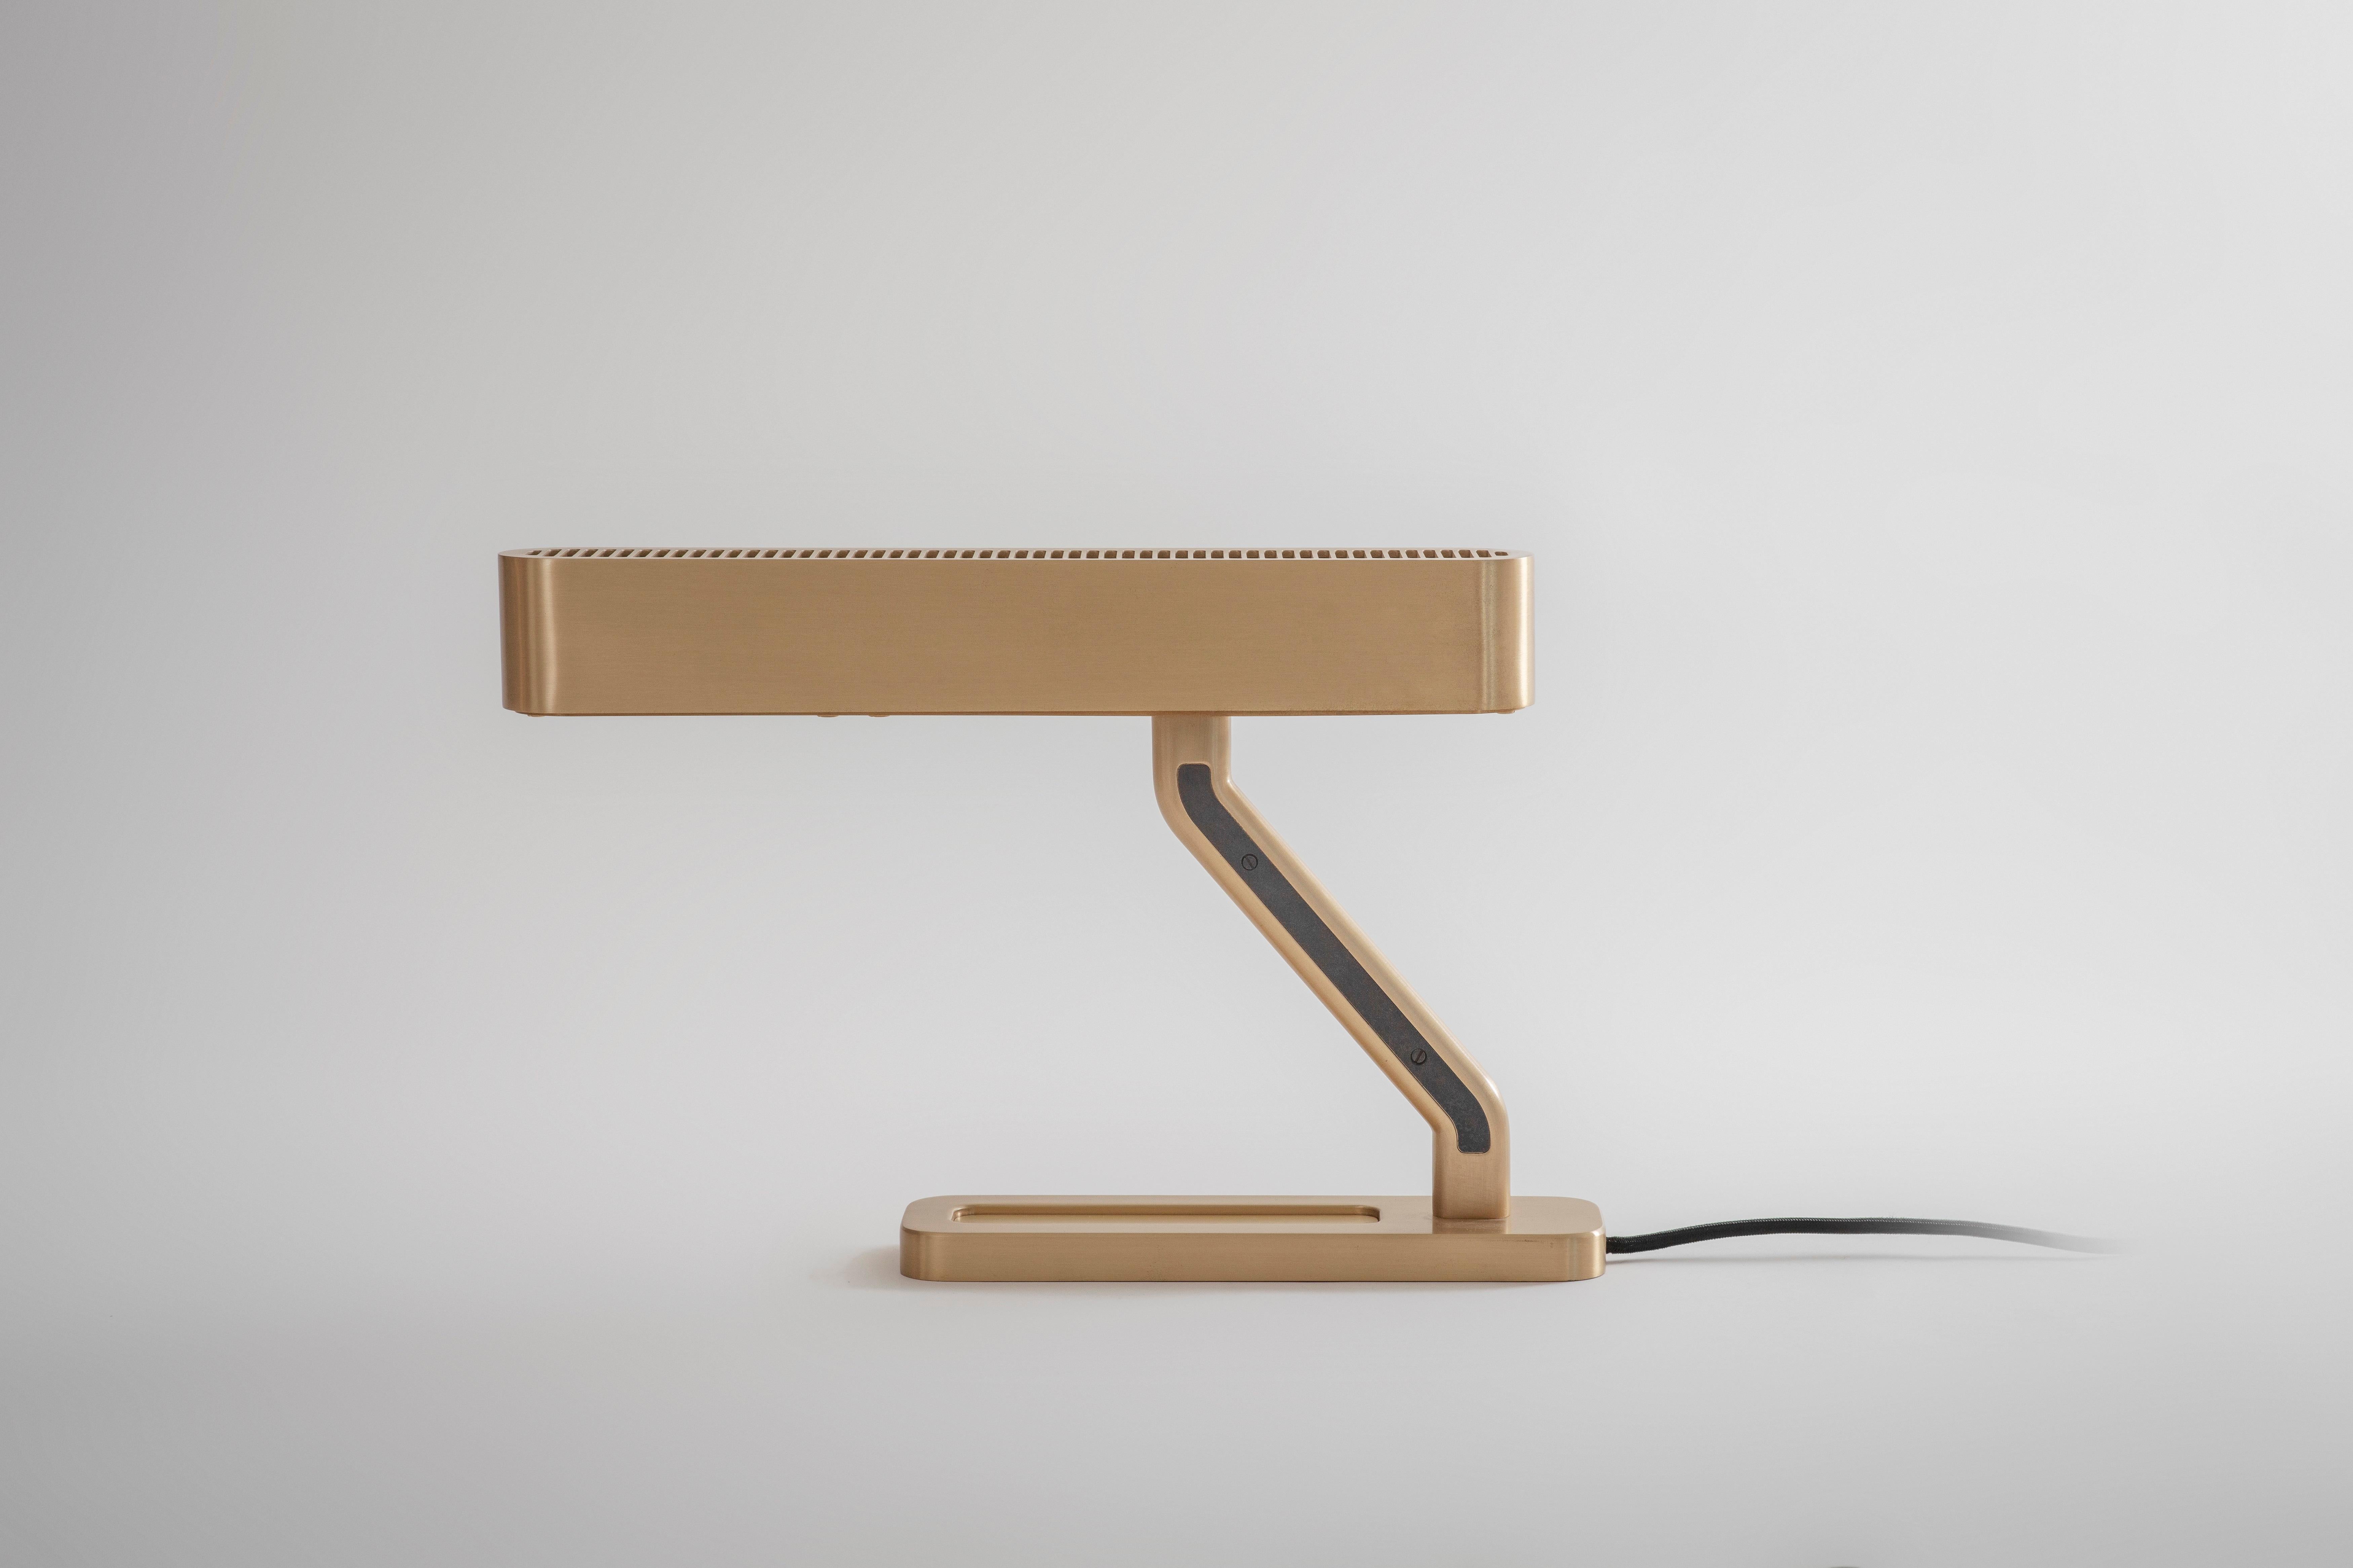 Colt table light by Bert Frank
Dimensions: 27.9 x 43 x 5.45 cm
Materials: Brass, bronze

Brushed brass lacquered as standard, custom finishes available.

When Adam Yeats and Robbie Llewellyn founded Bert Frank in 2013 it was a meeting of minds